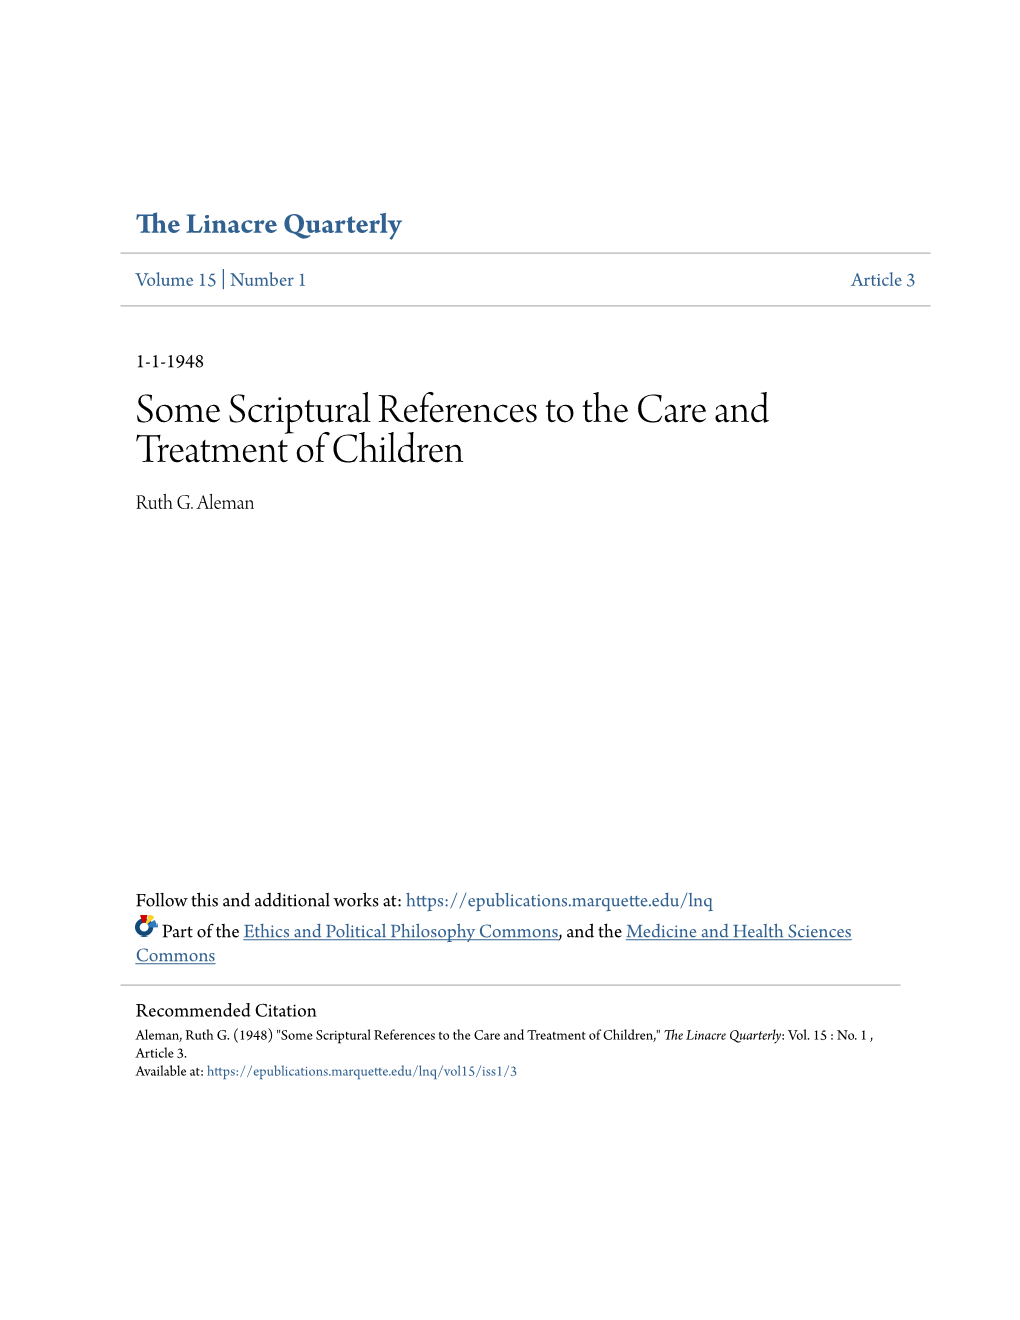 Some Scriptural References to the Care and Treatment of Children Ruth G